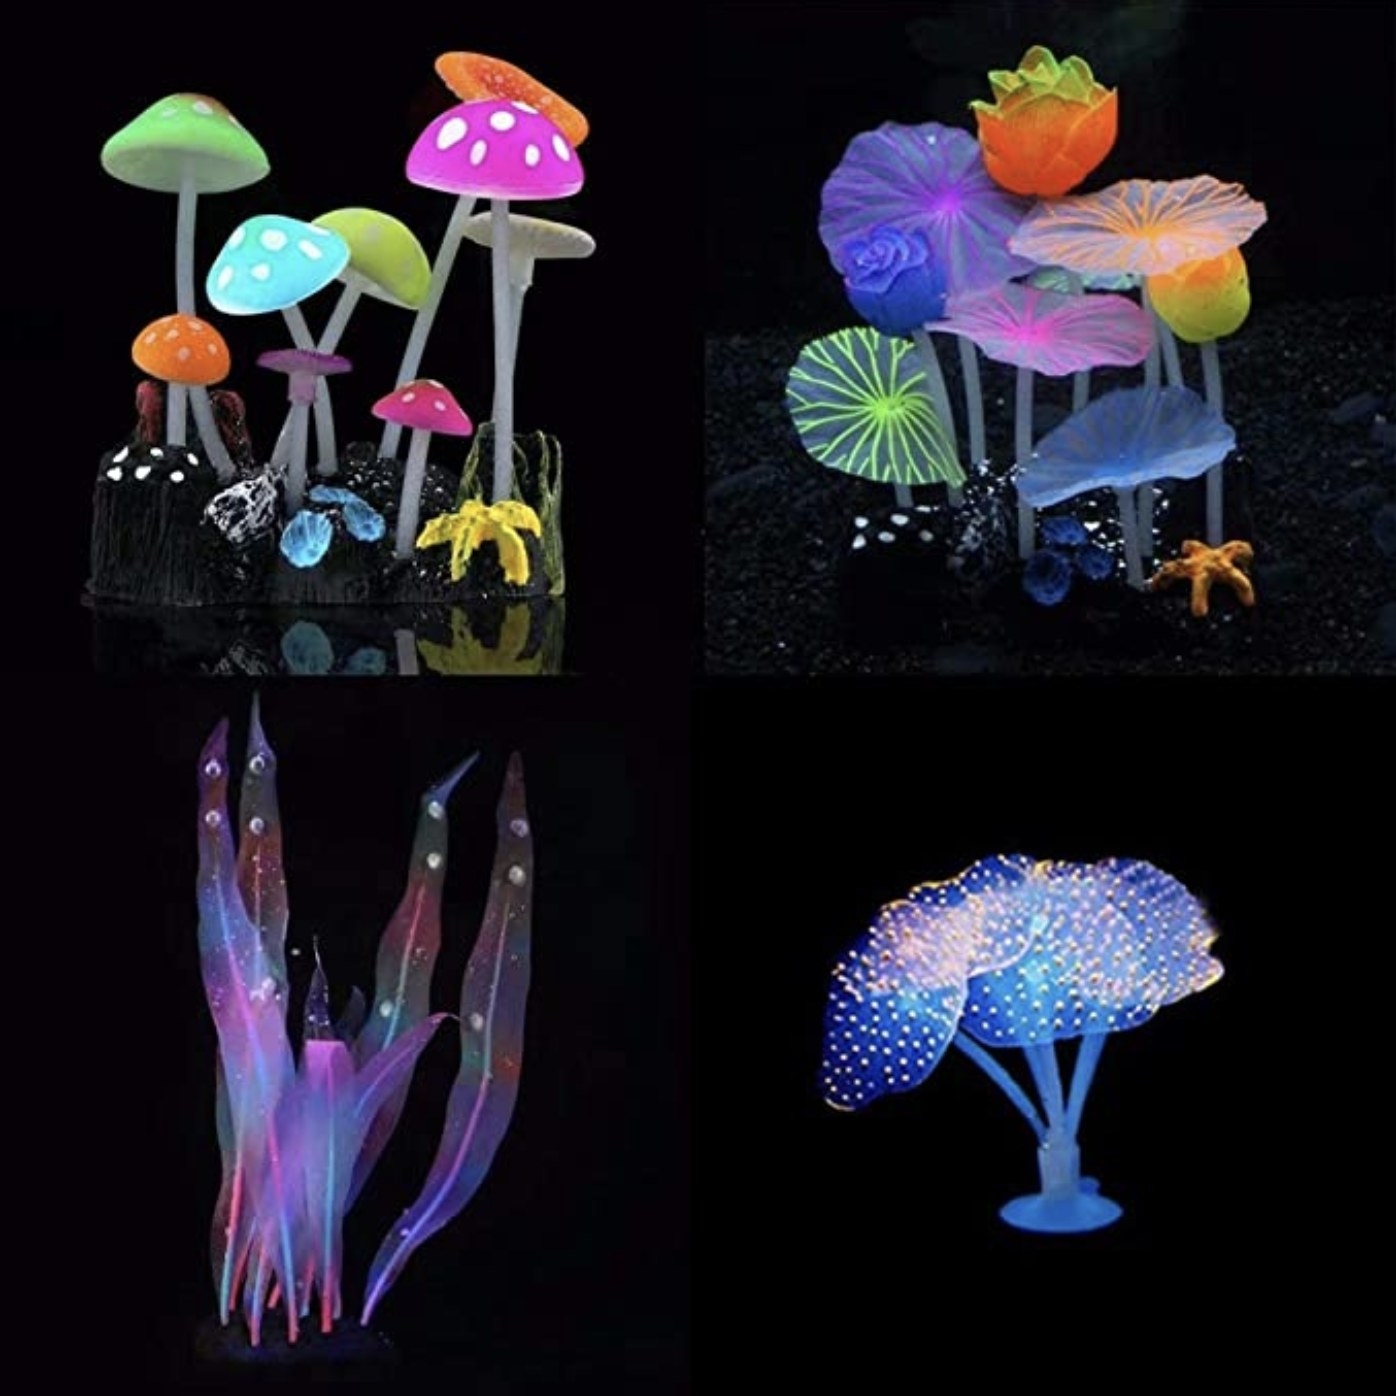 The glowing decorations are shaped like mushrooms, coral, and seaweed 